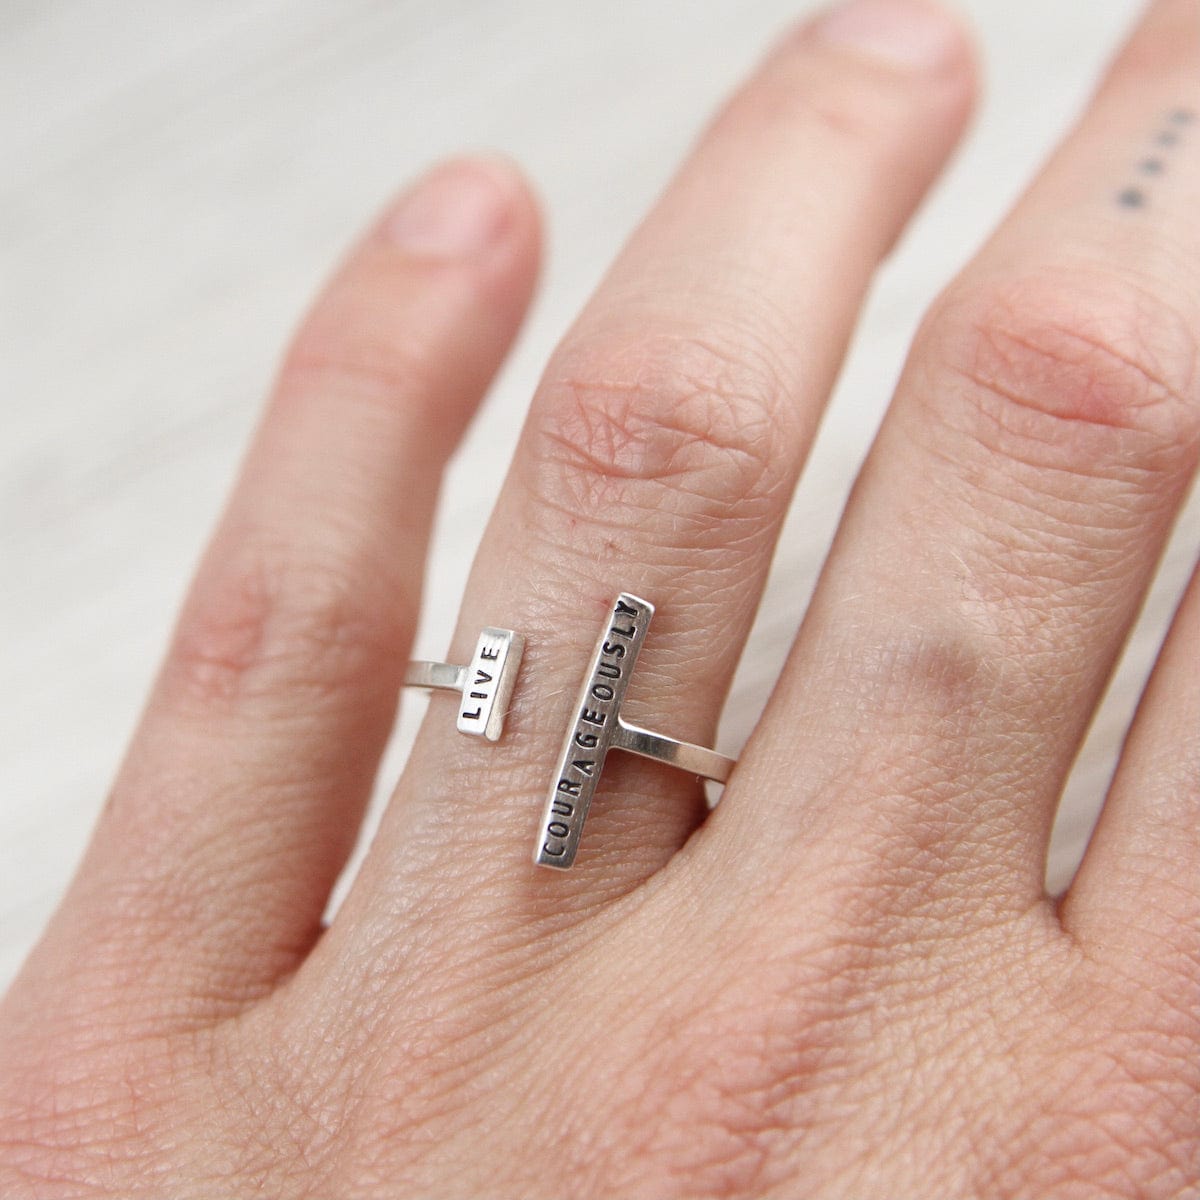 RNG Adjustable Ring - "Live Courageously"